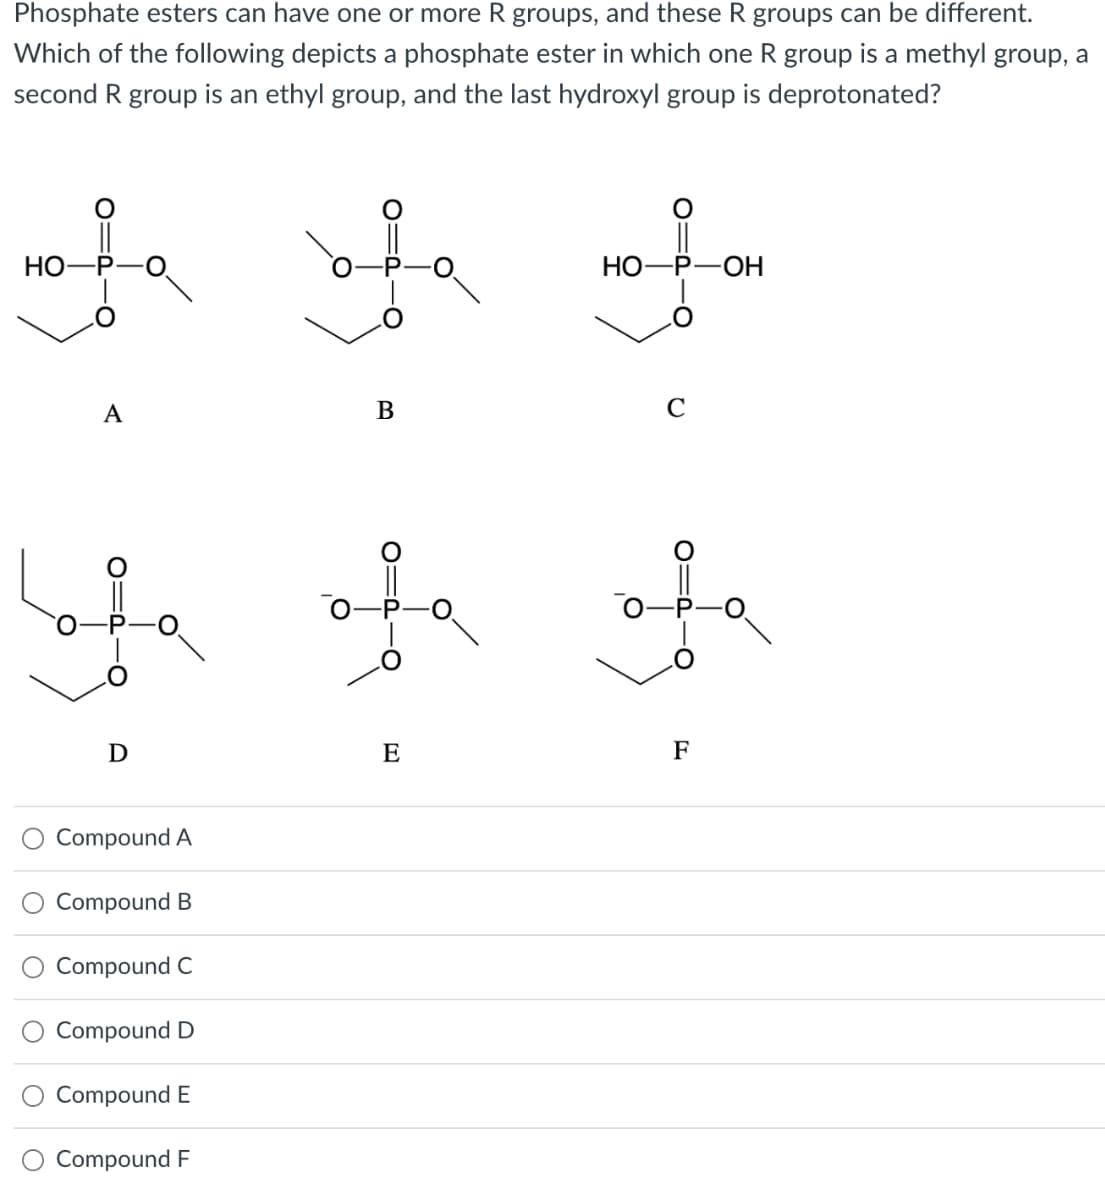 Phosphate esters can have one or more R groups, and these R groups can be different.
Which of the following depicts a phosphate ester in which one R group is a methyl group, a
second R group is an ethyl group, and the last hydroxyl group is deprotonated?
ofe
HO-
Lo
A
D
Compound A
Compound B
Compound C
Compound D
Compound E
Compound F
of
B
E
HO-P-OH
O'
-O
C
OIP
F